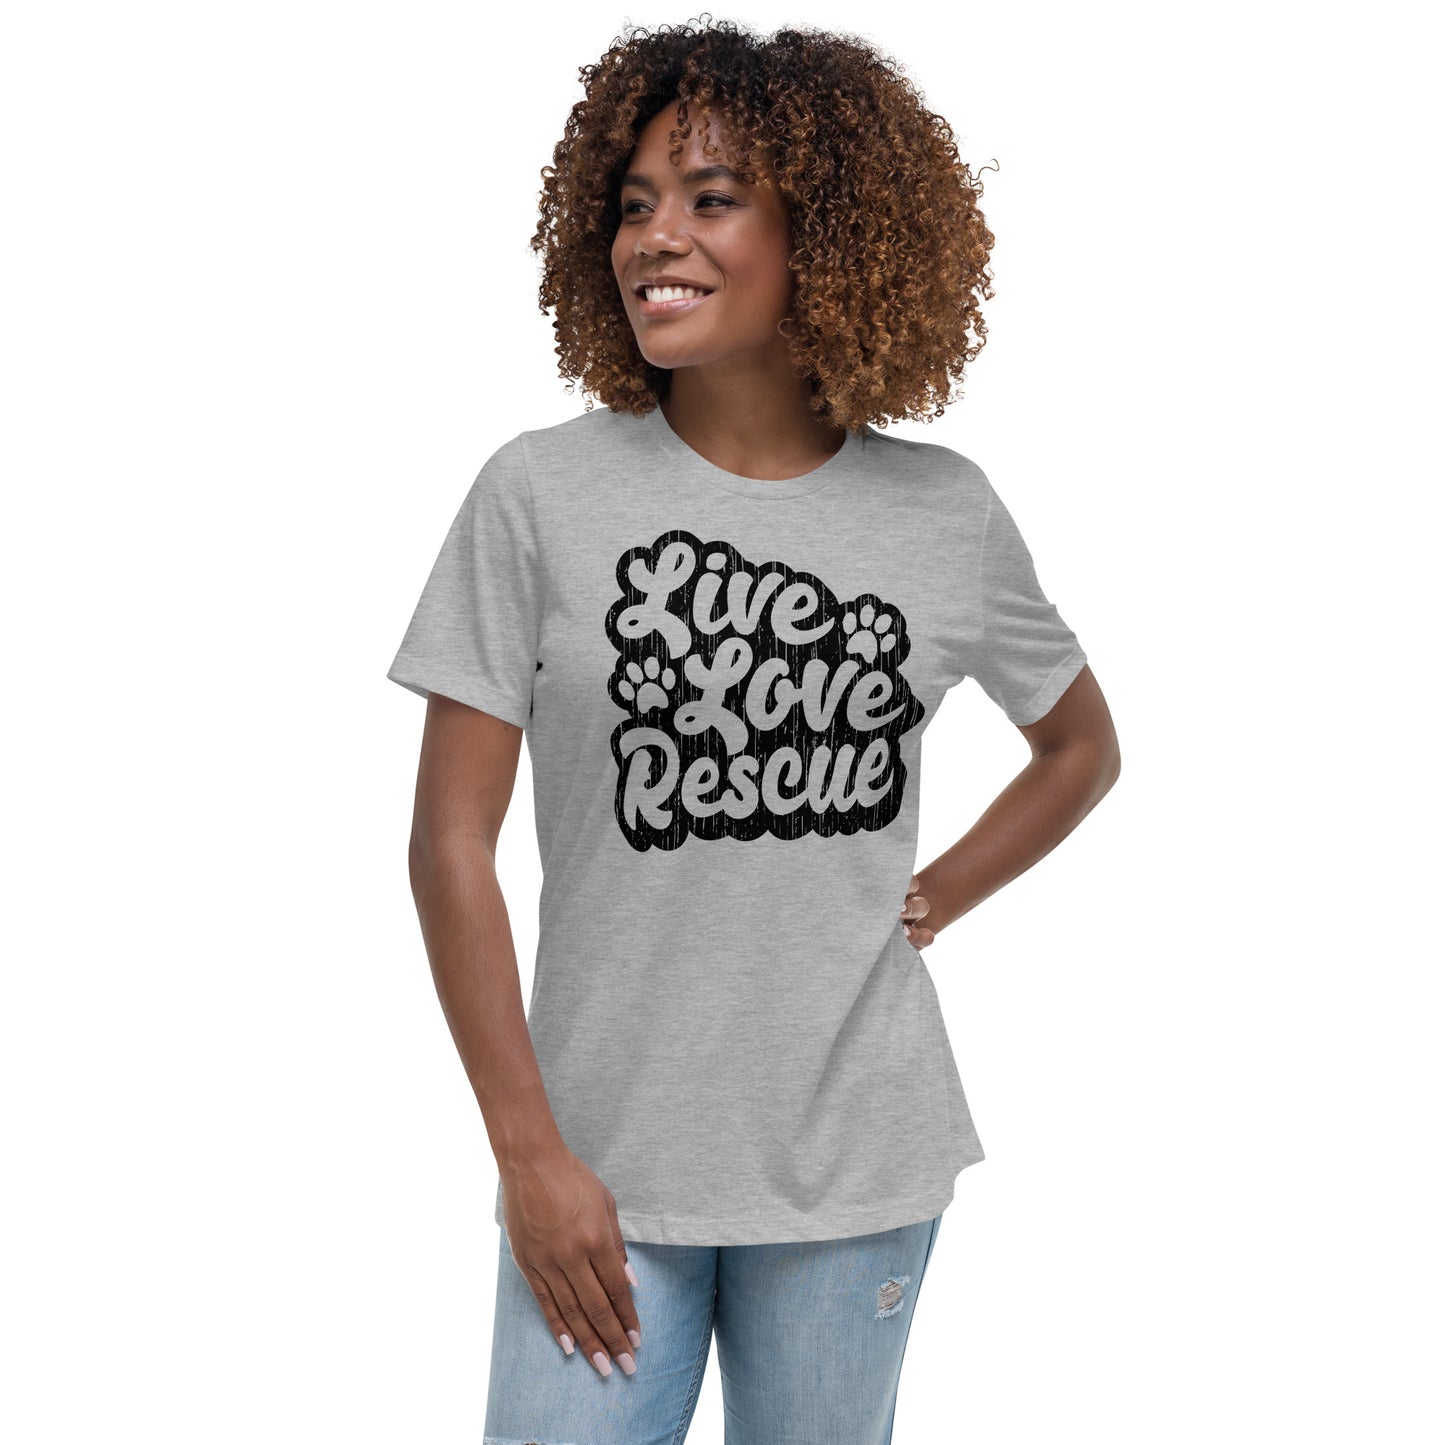 Live love rescue retro women’s relaxed fit t-shirts by Dog Artistry athletic heather color